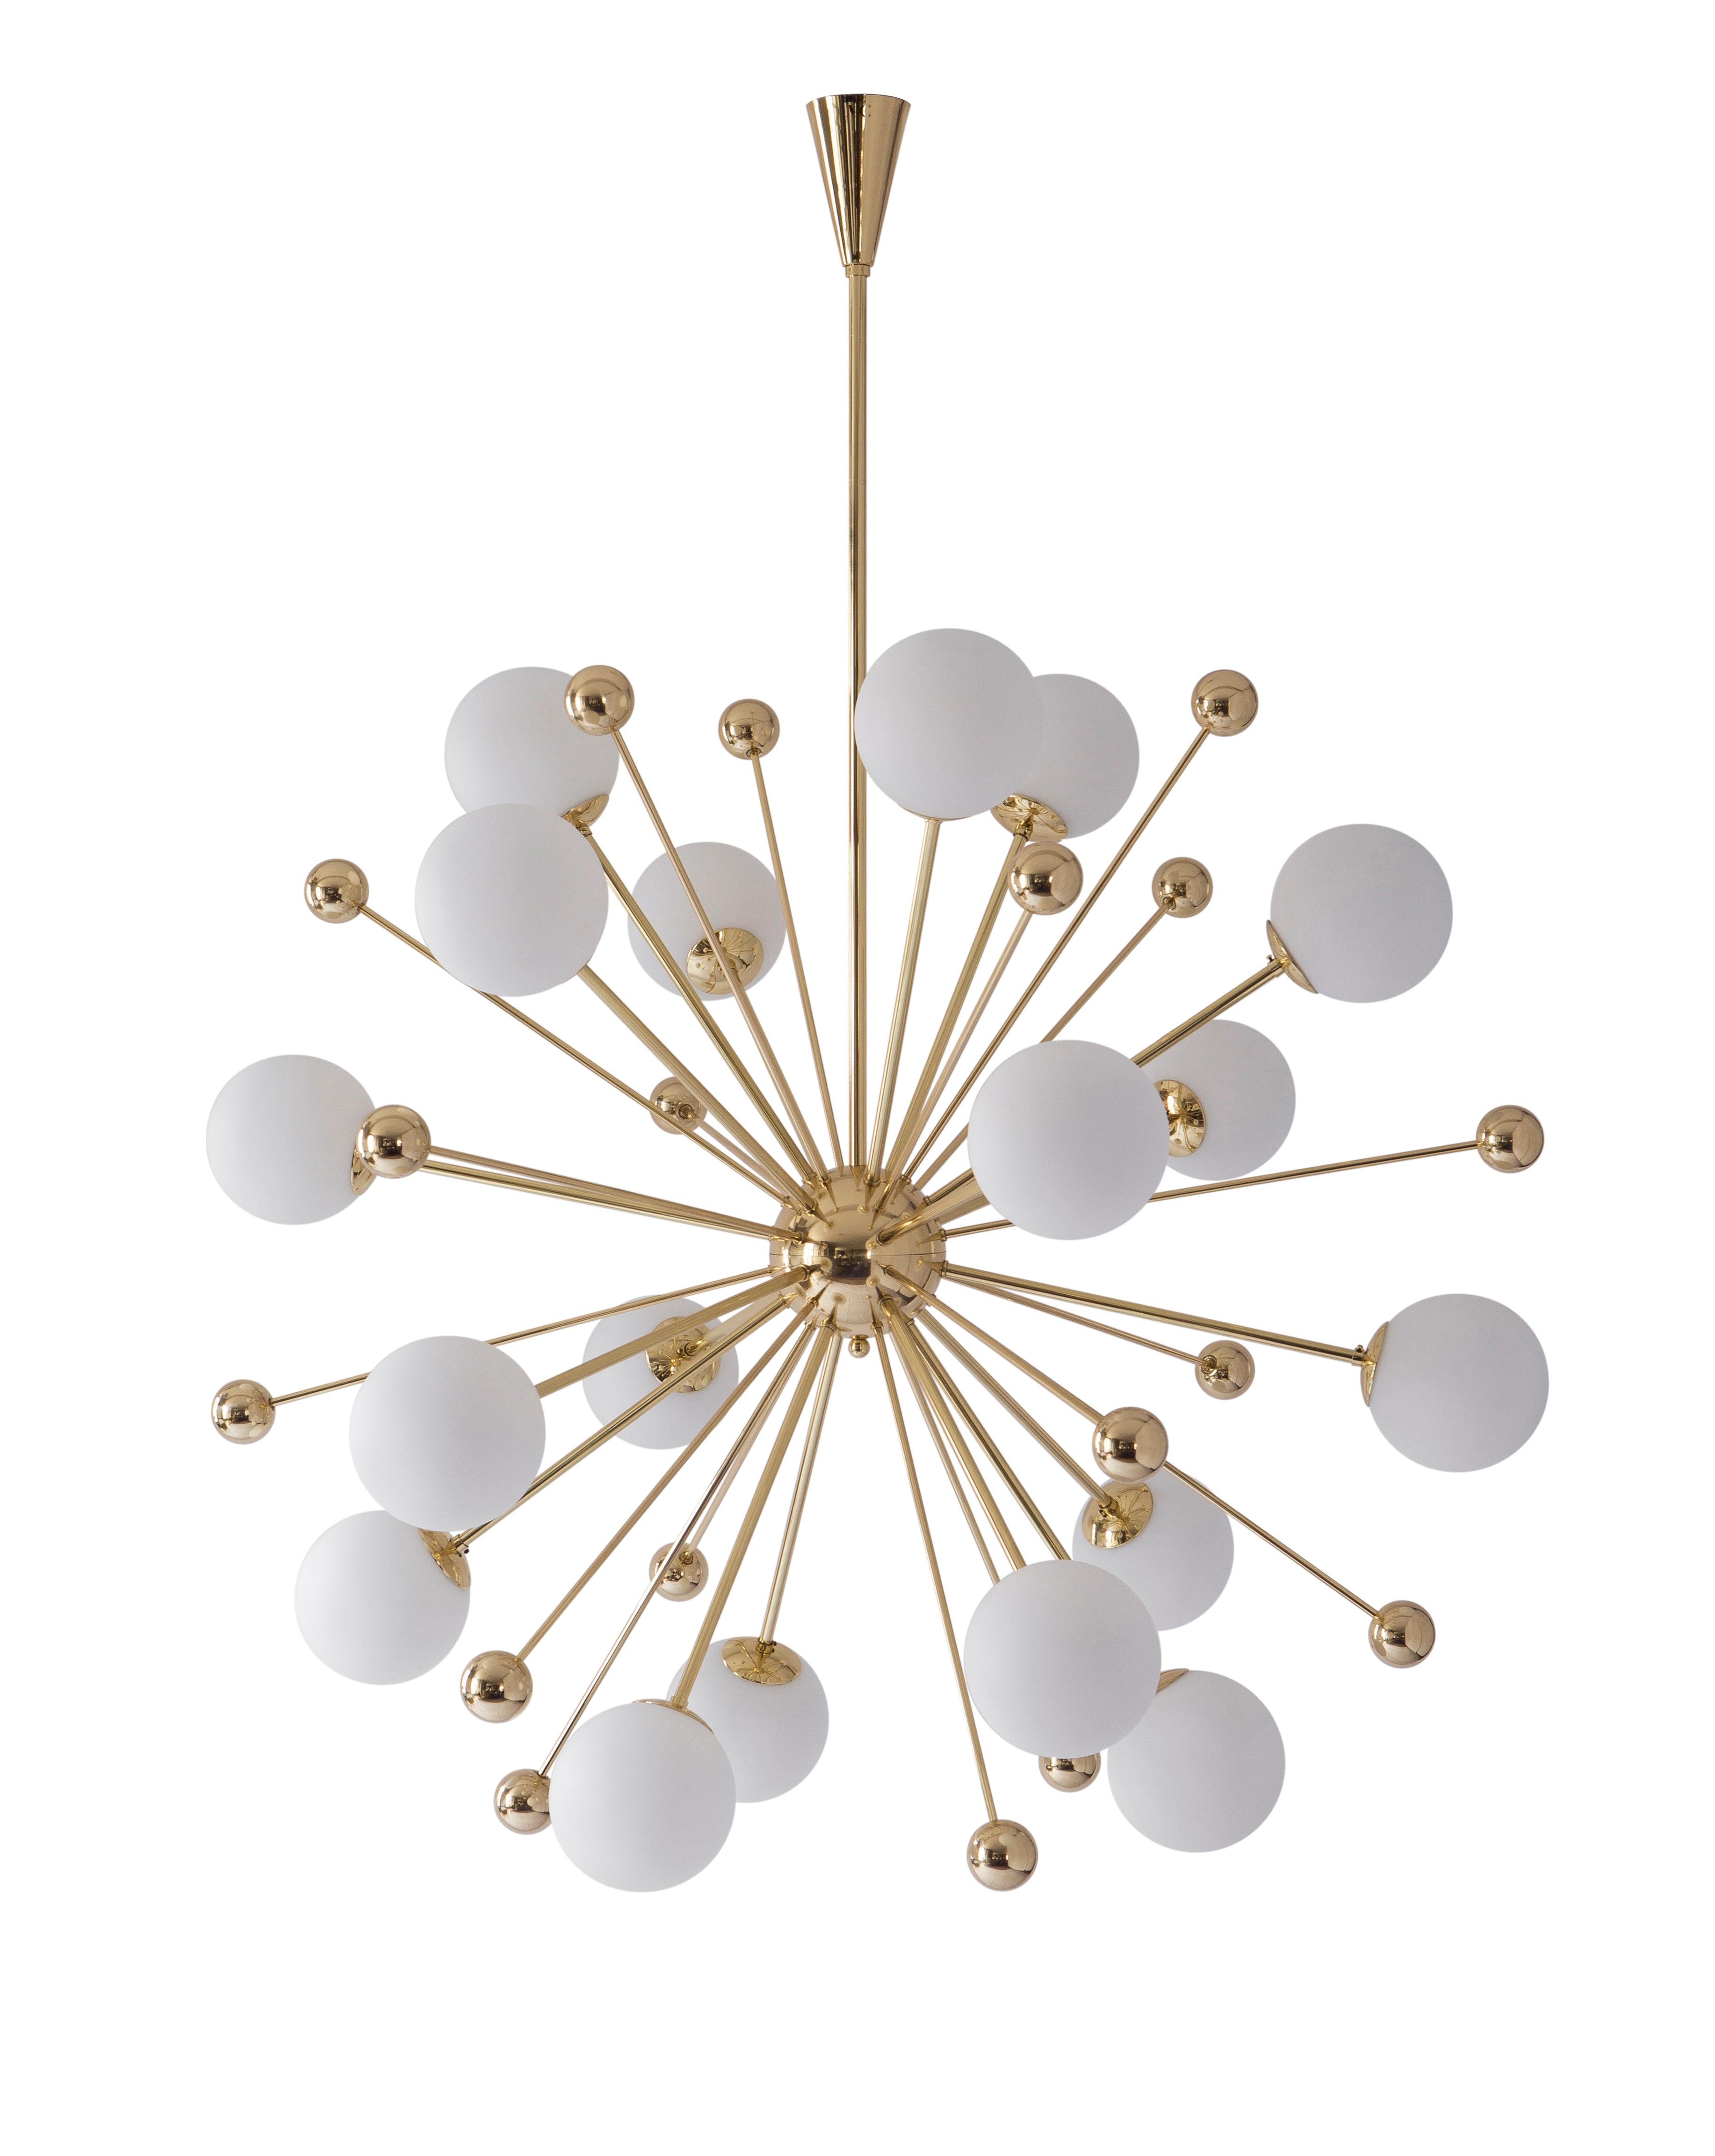 Chandelier 01 version 1 by Magic Circus Editions
Dimensions: H 155 x W 125 cm
 Spheres: Glass 160
 Brass 60
Materials: Smooth brass, mouth blown glass
Available finishes: brass, nickel, lacquered black, red brick
18 × Led G9 / 5W. 220V